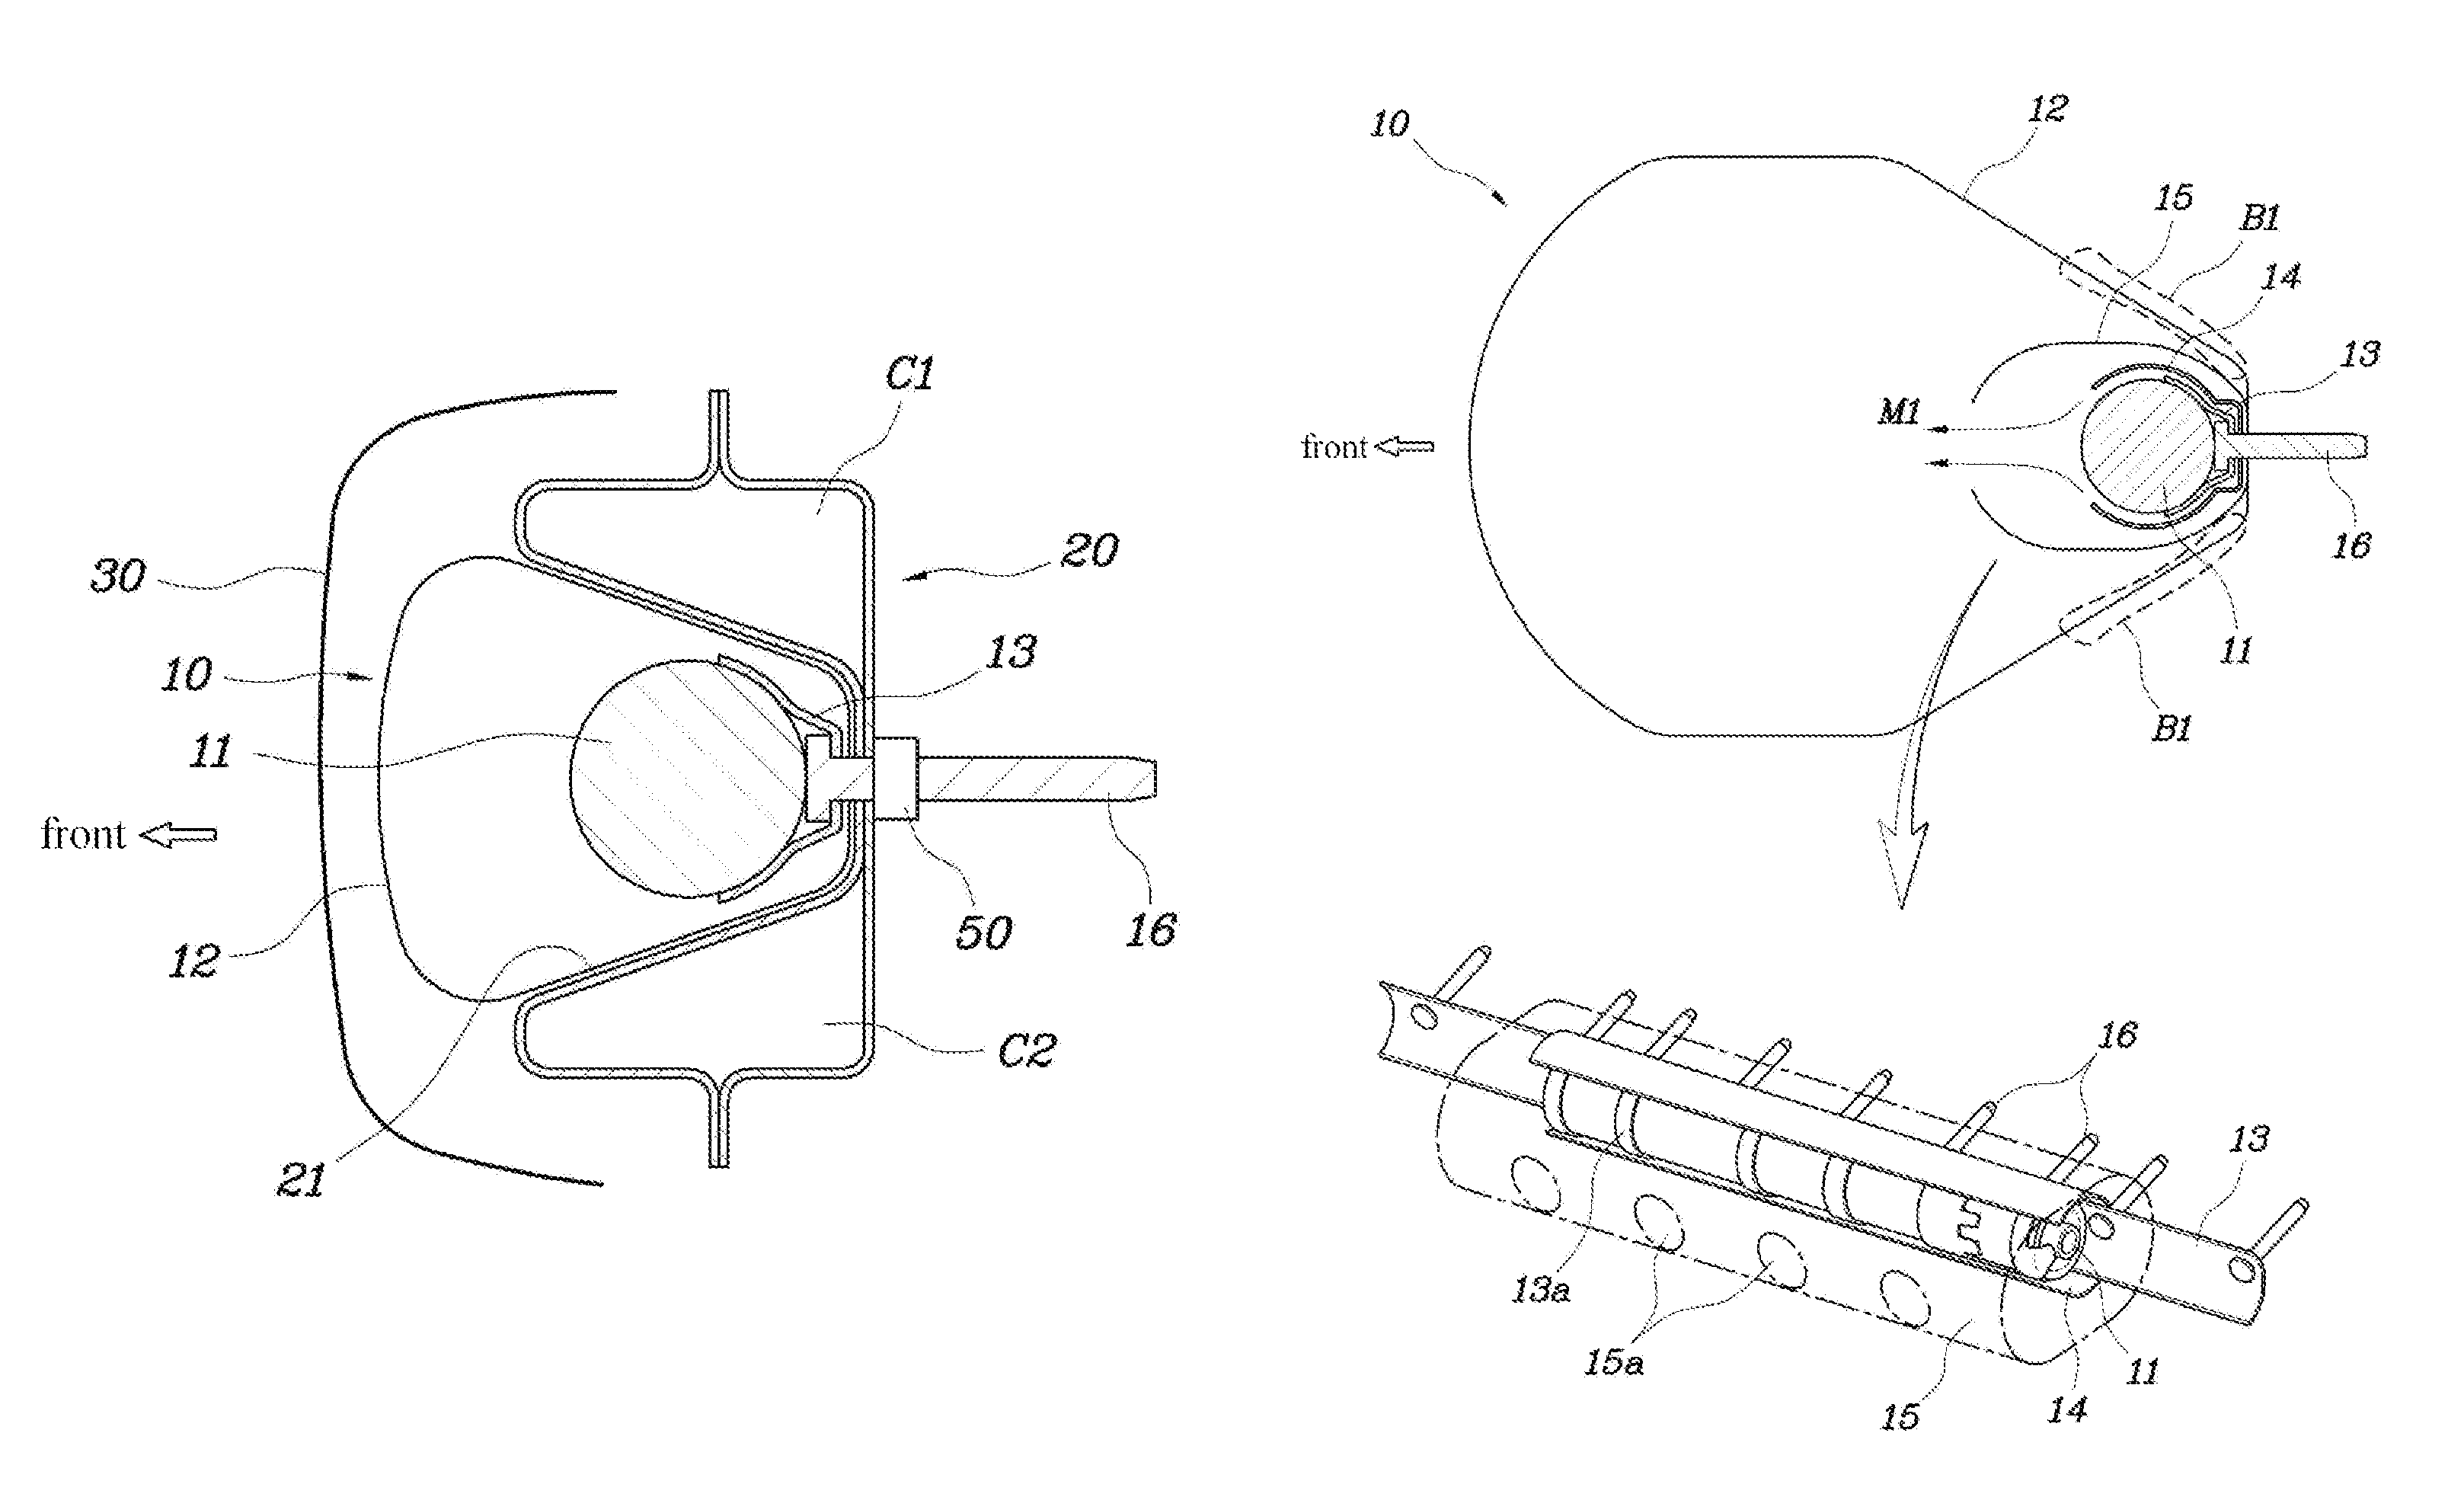 External airbag module for vehicle and back beam for mounting external airbag module